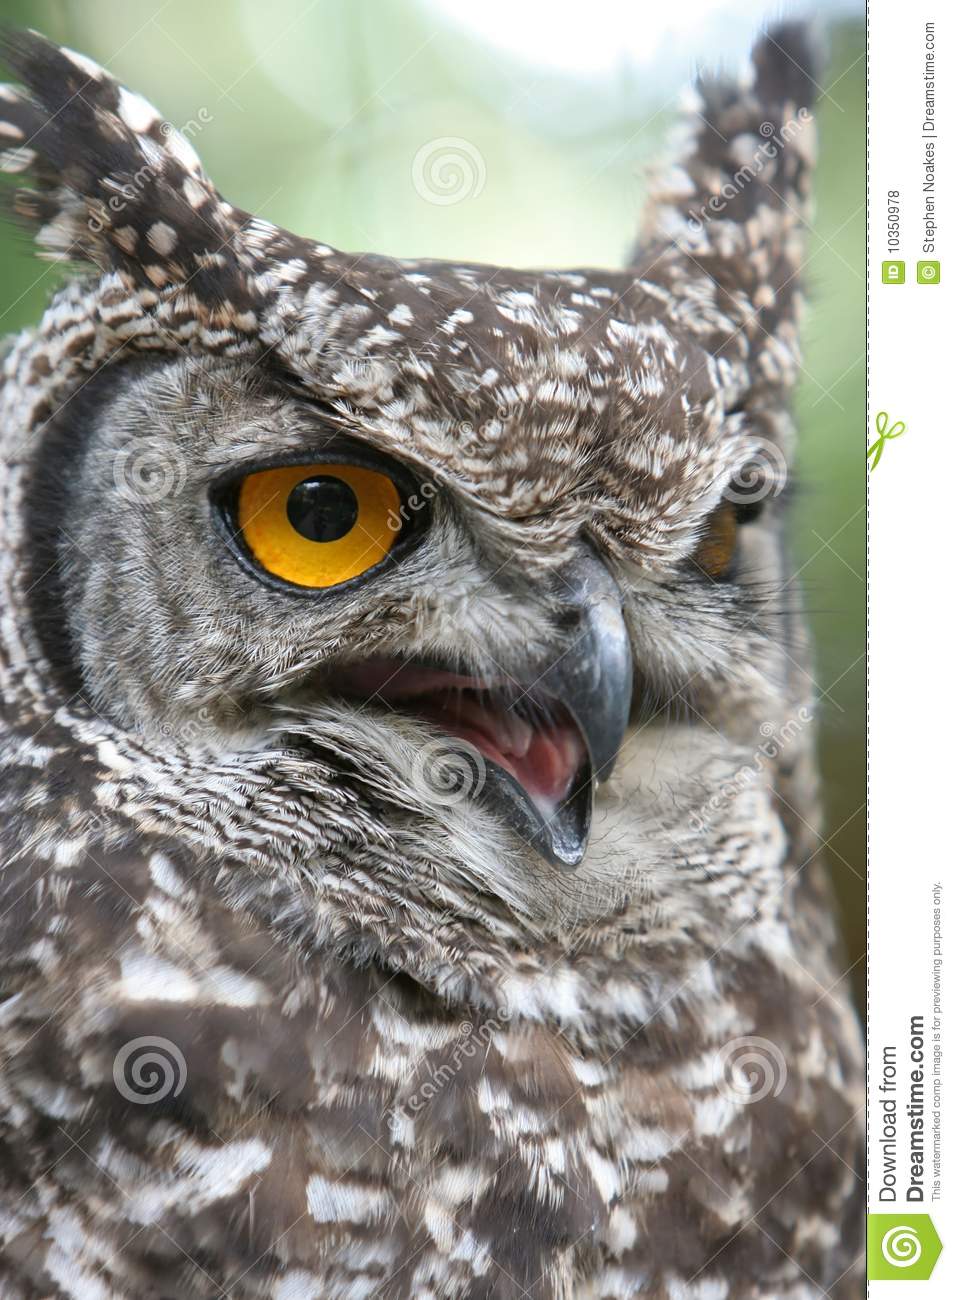 Eagle Owl Angry Royalty Free Stock Photos   Image  10350978